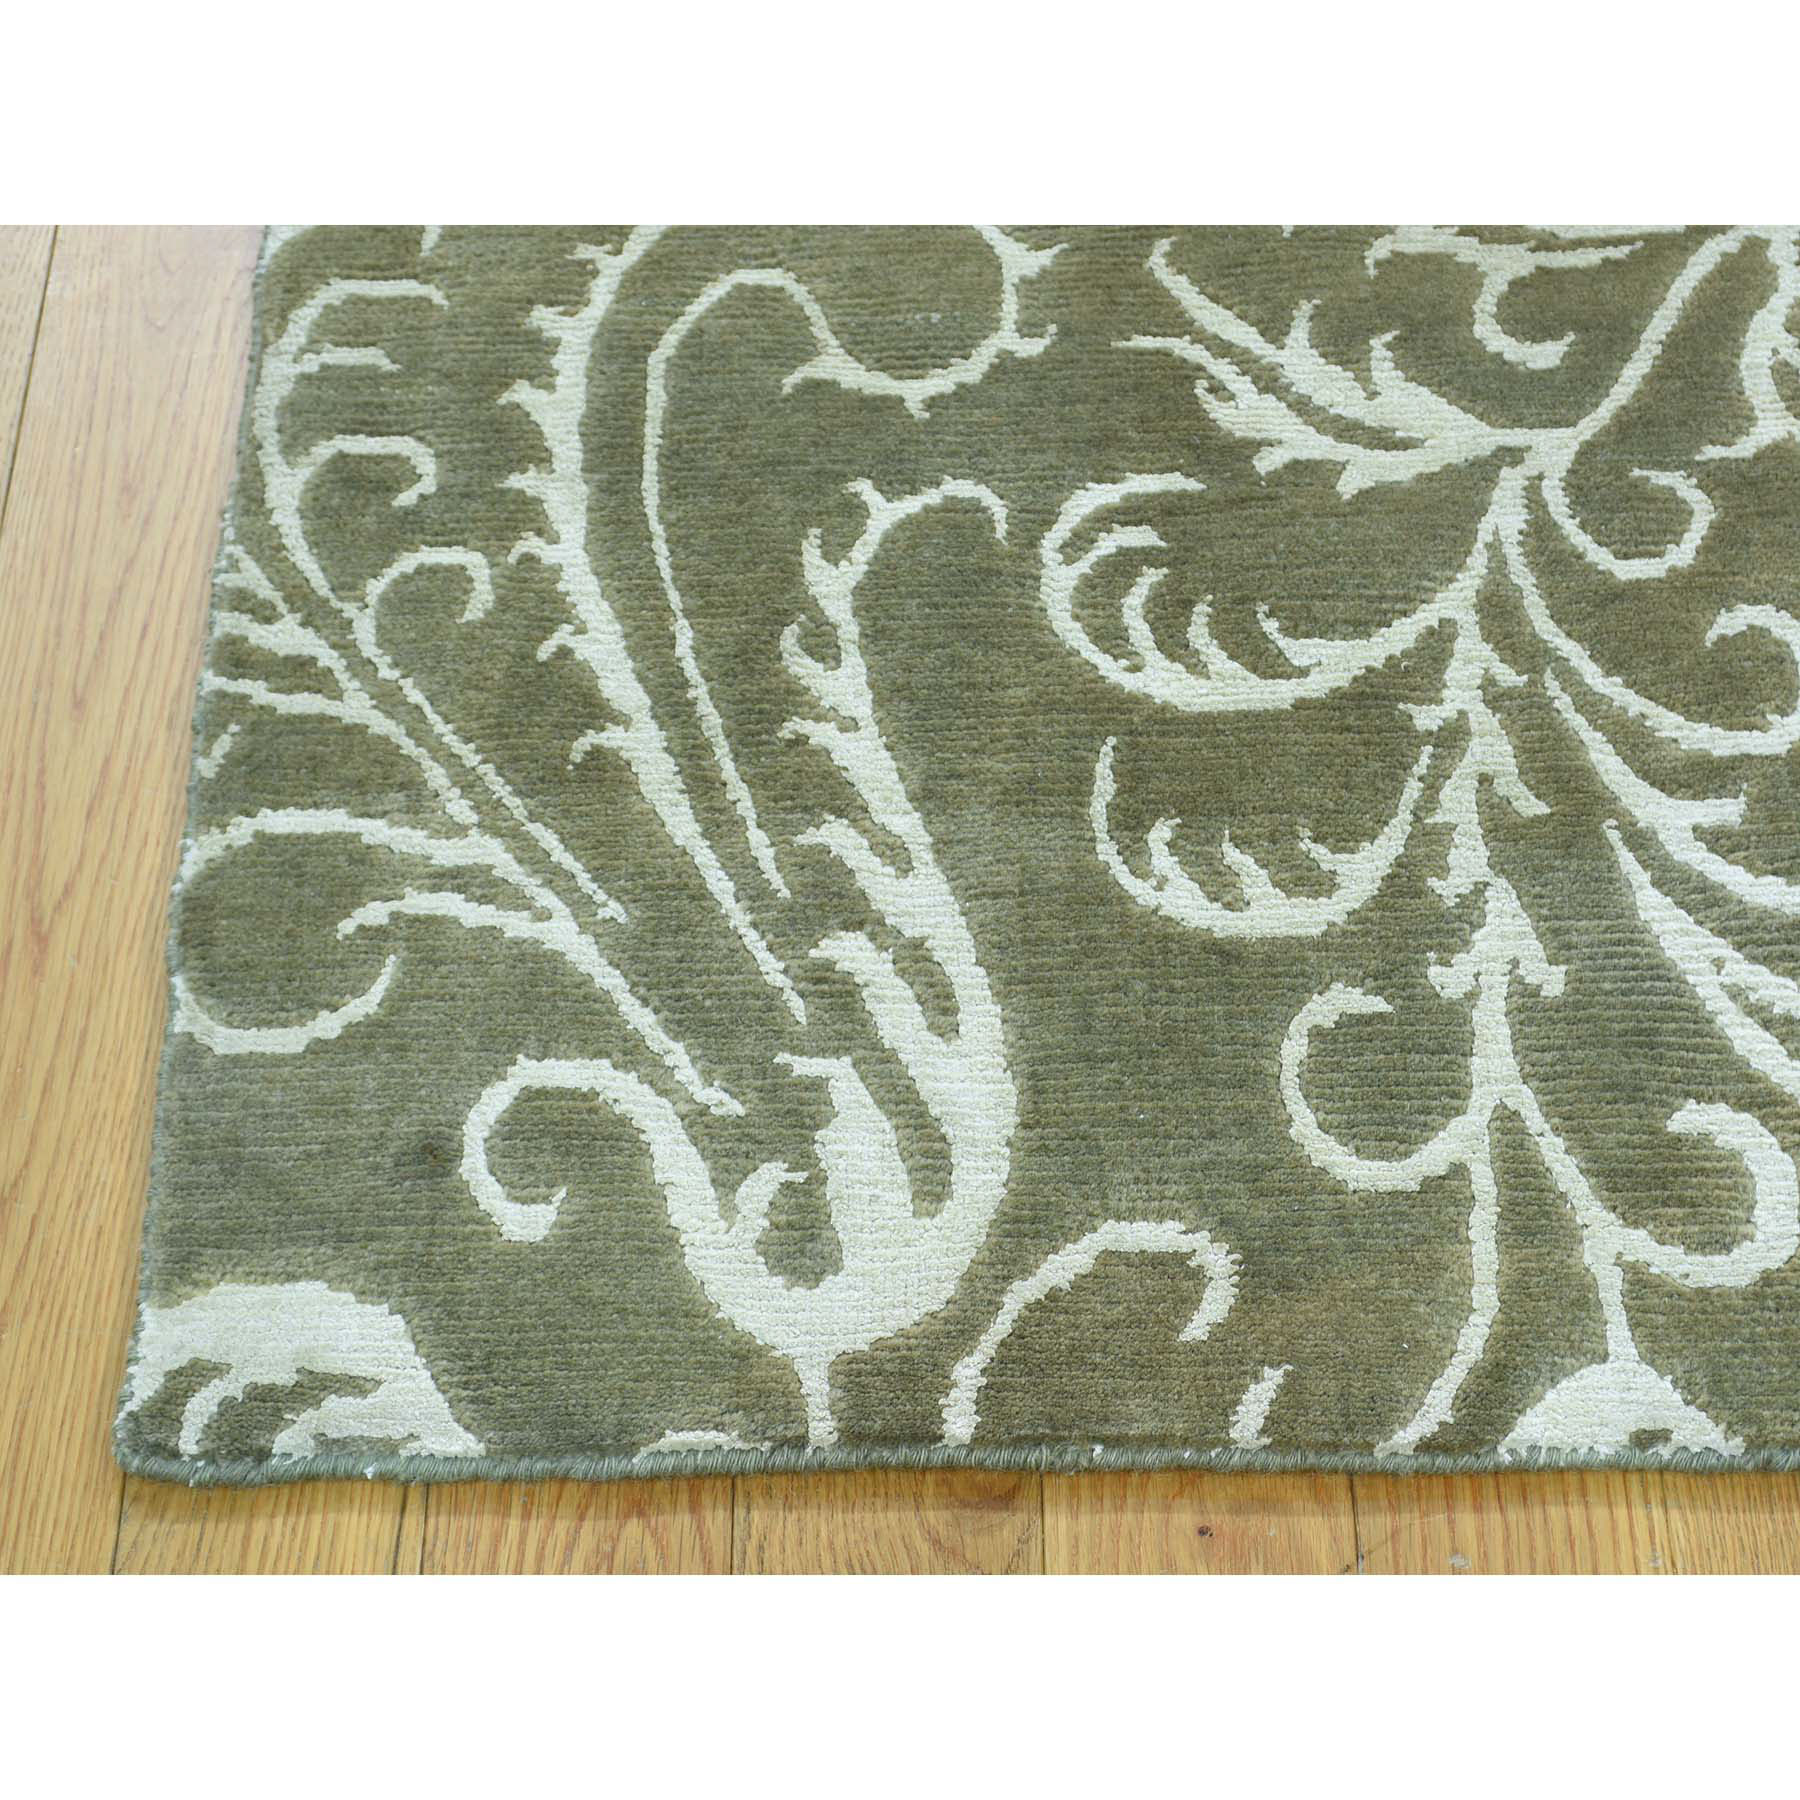 2'x2'9" Hand Woven Wool and Silk Nepali Olive Green Oriental Rug 